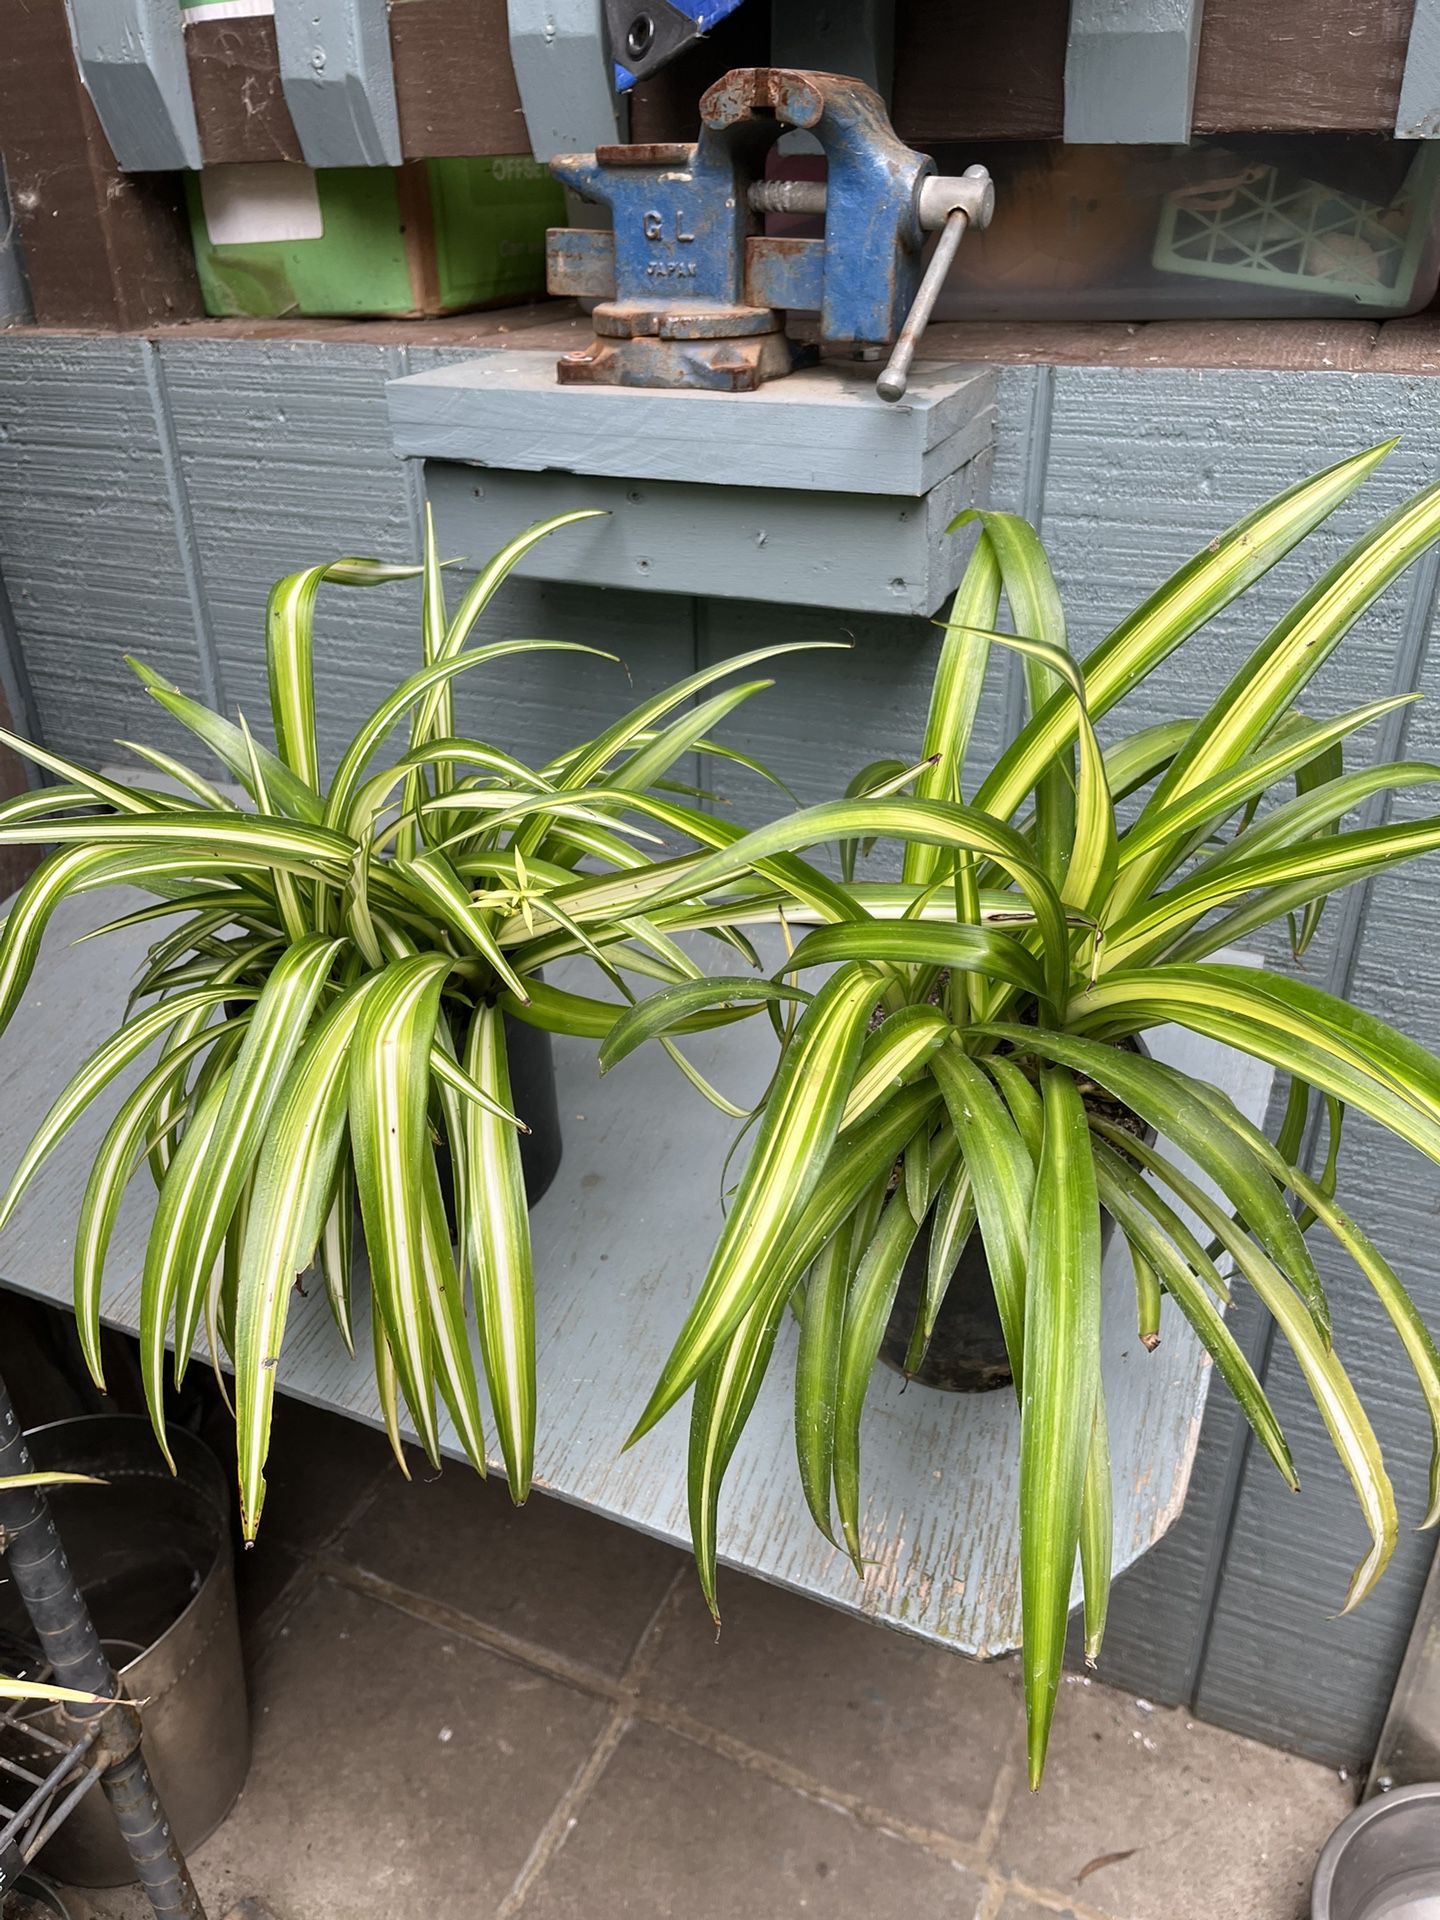 Beautiful Large Spider Plants 1 Gallon Pots $13 For Both 